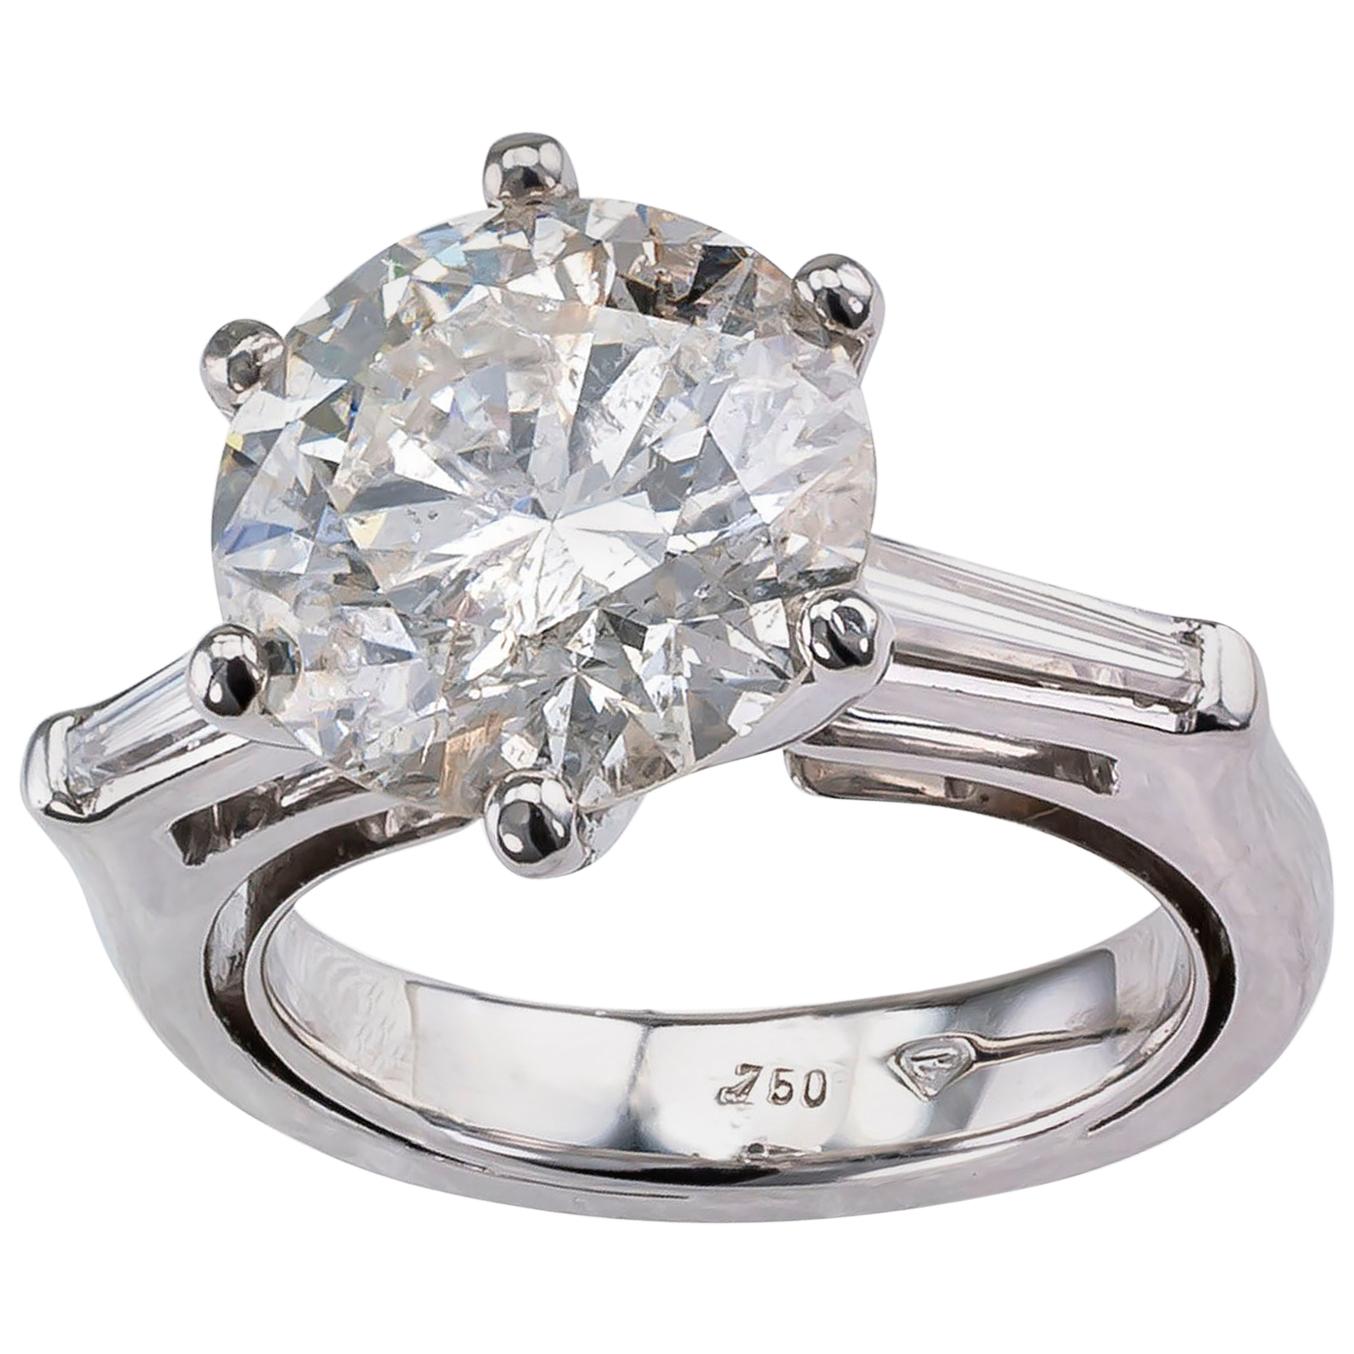 Engagement Ring 4.43 Carat Diamond Solitaire White Gold